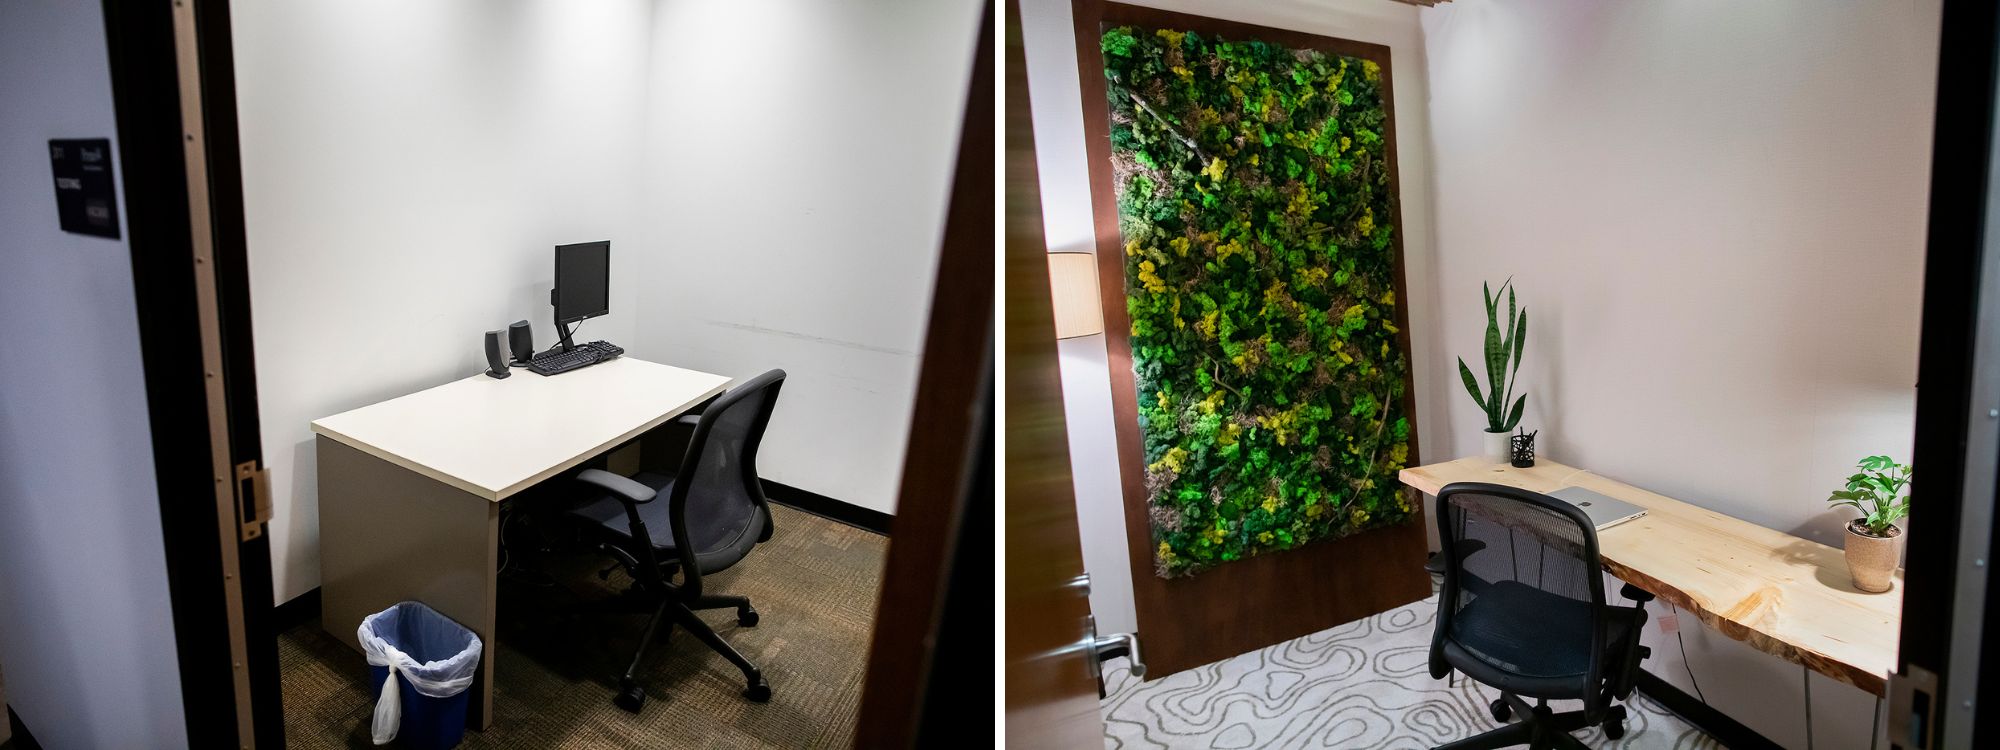 Left: the original, plain office room; right: a living wall beside a desk with a potted plant.